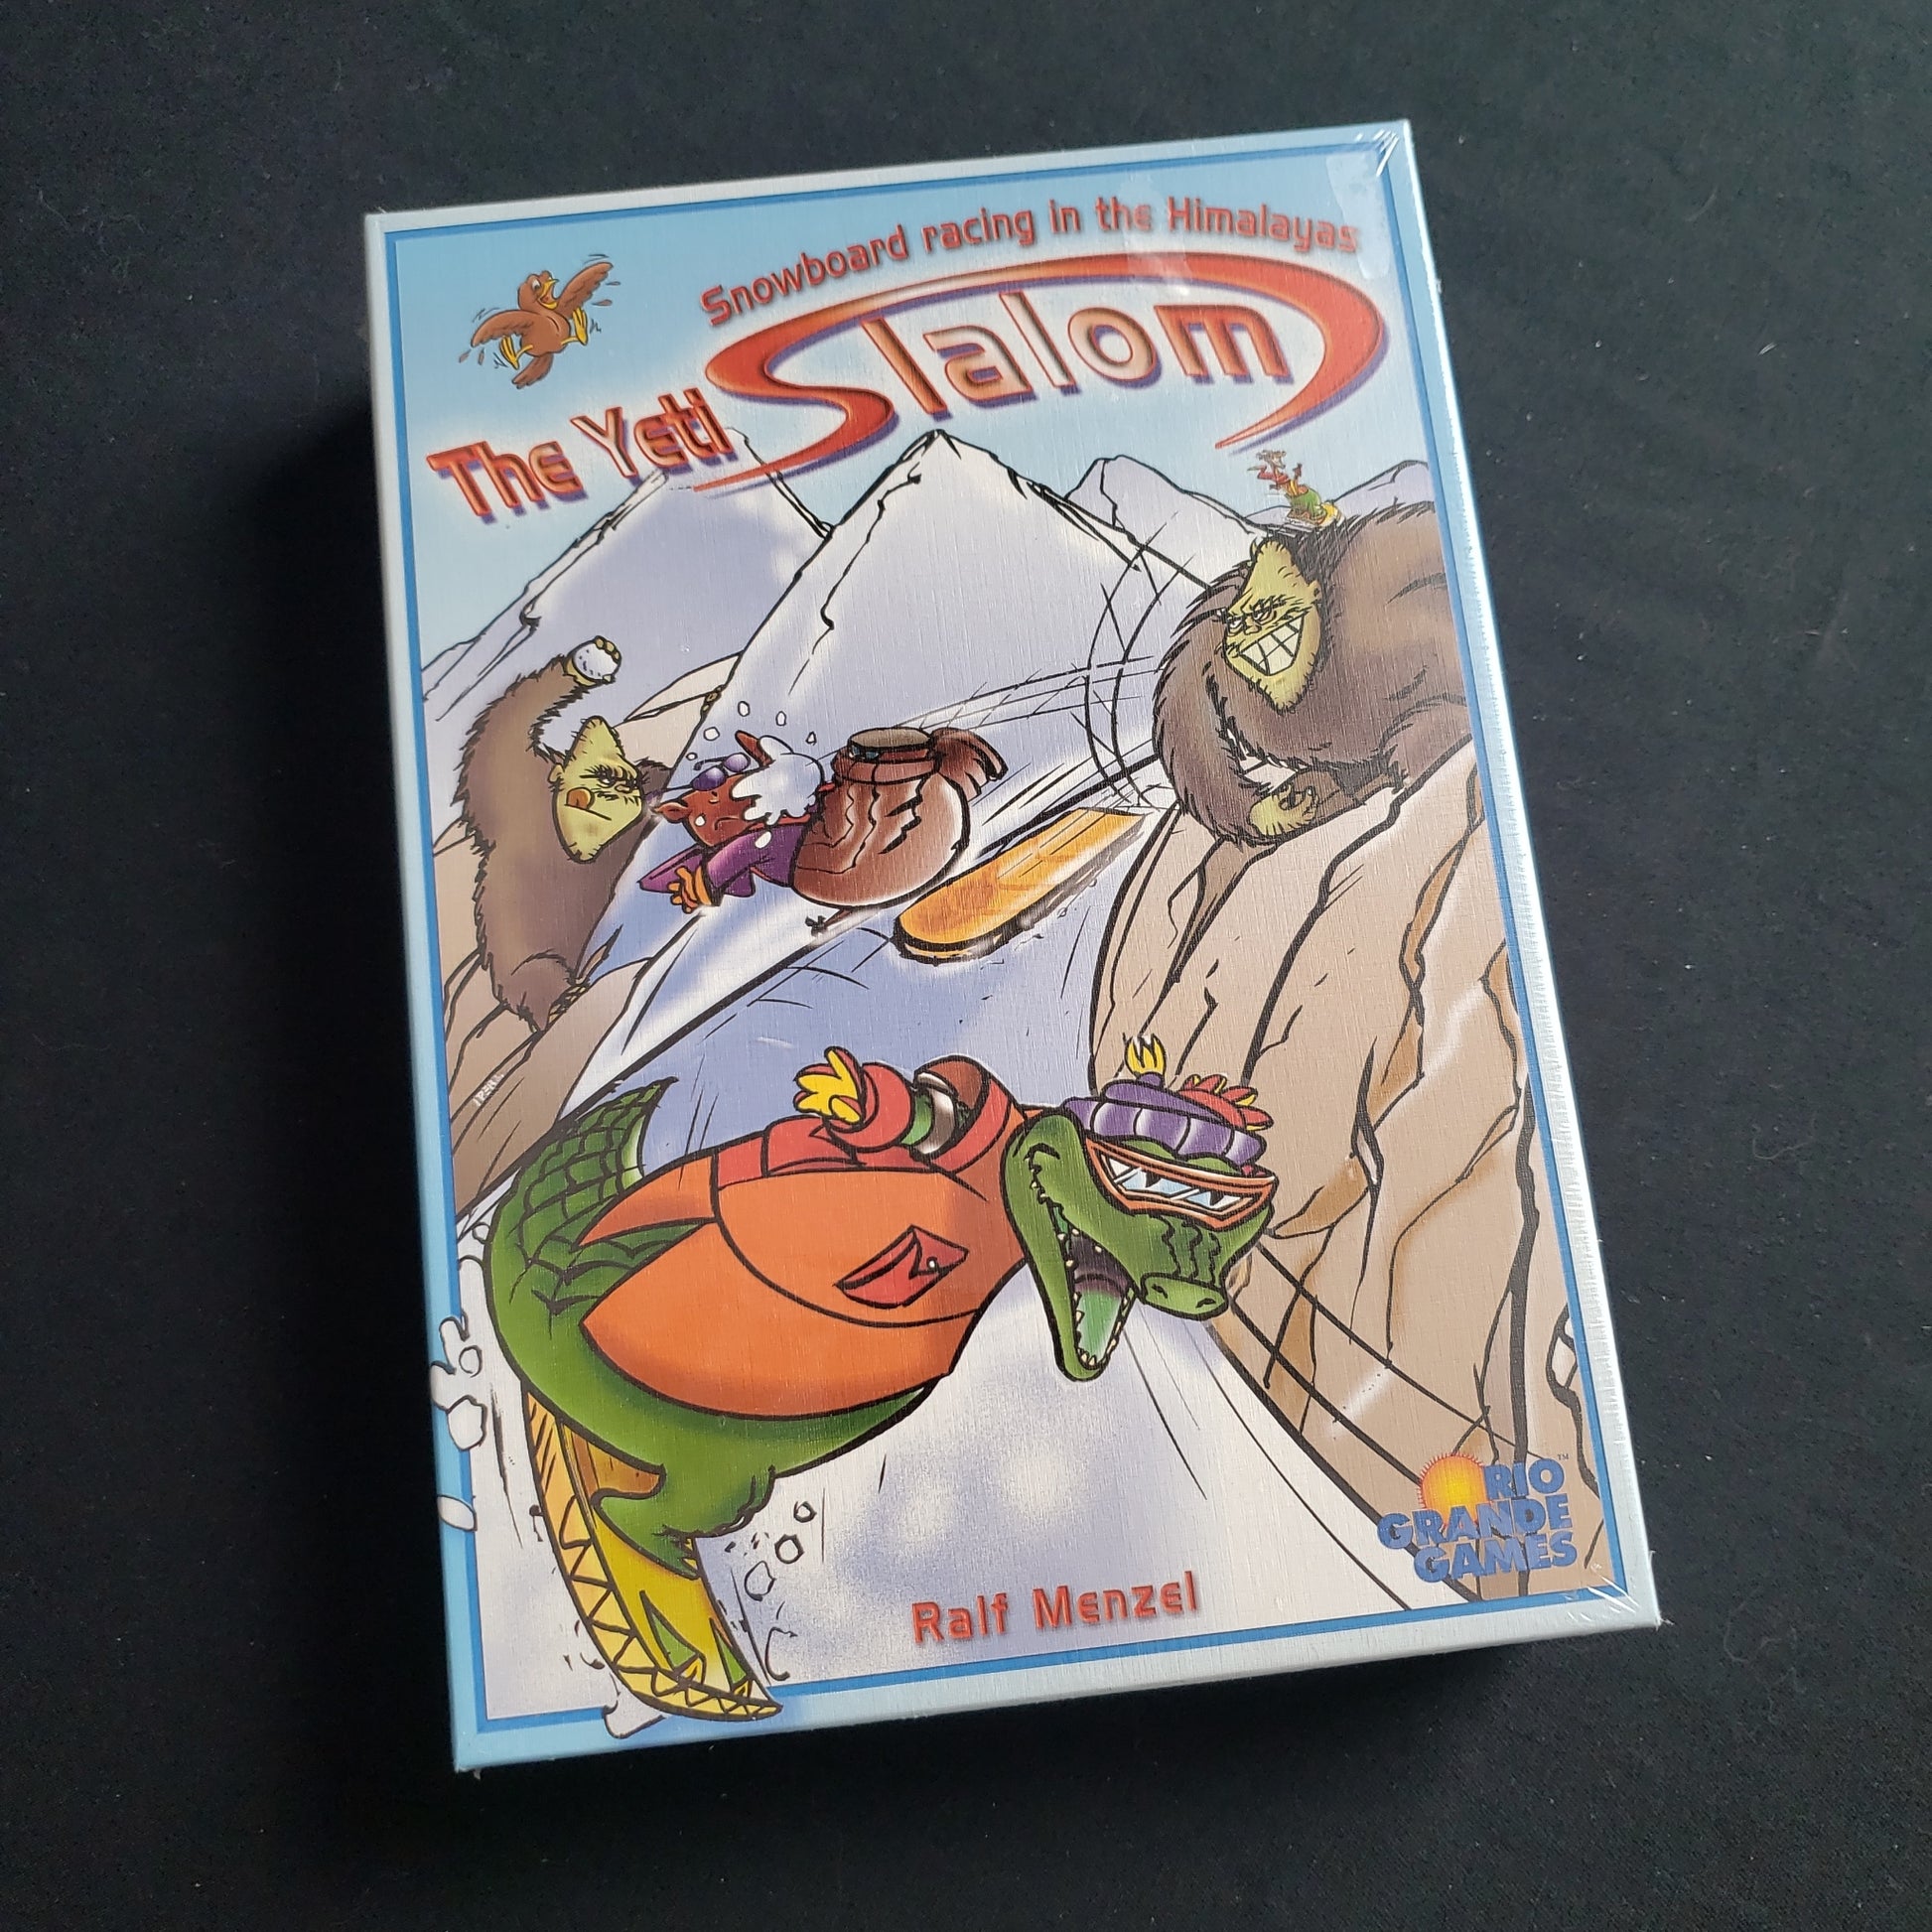 Image shows the front cover of the box of the Yeti Slalom board game